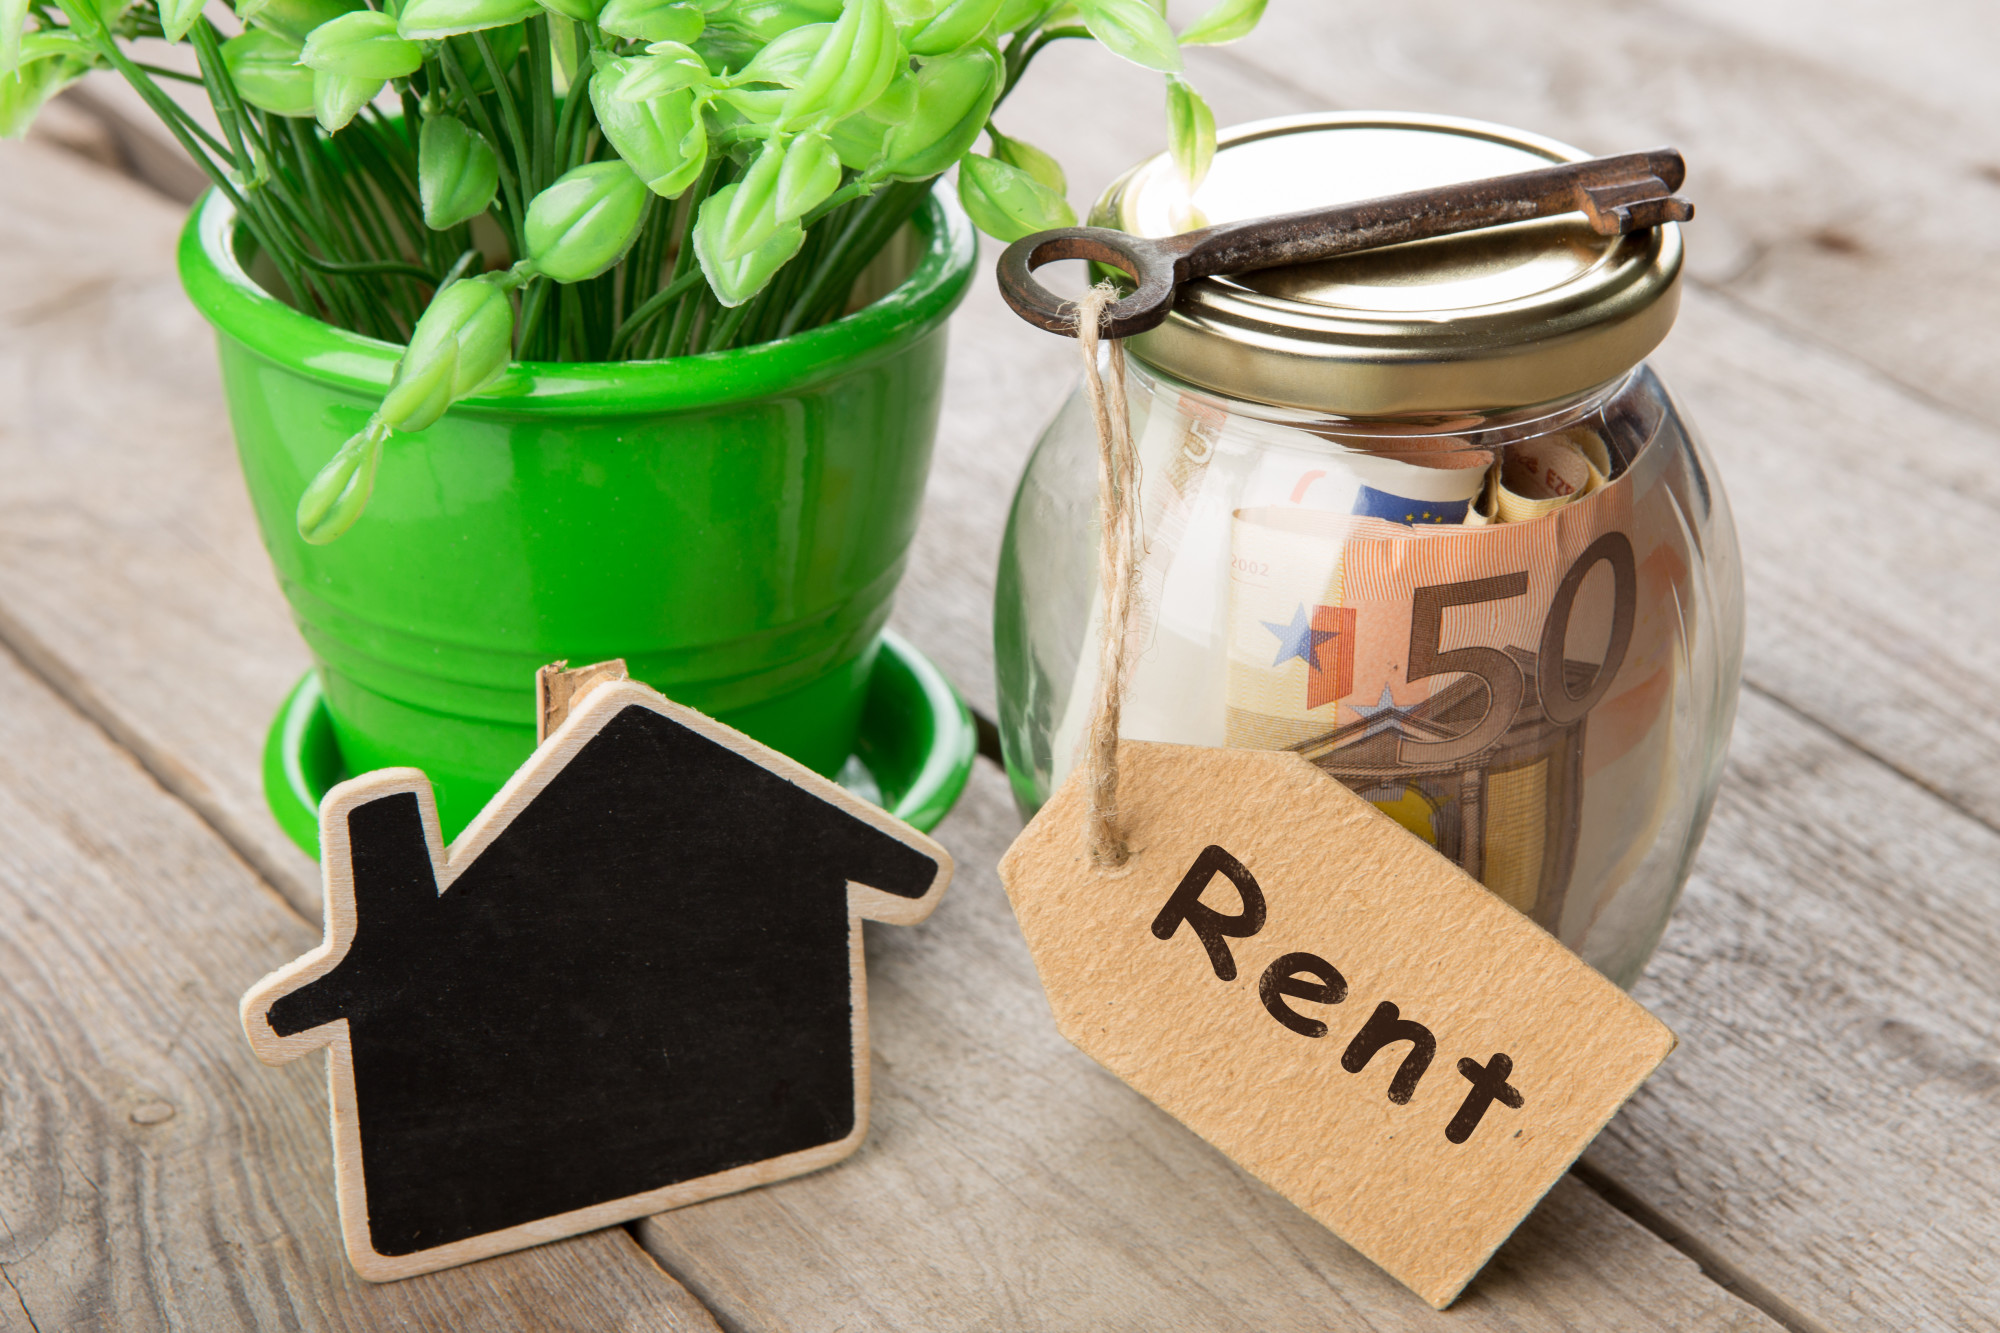 As a landlord, dealing with a late rent payment is frustrating. Learn what your options are with this brief guide on the topic.